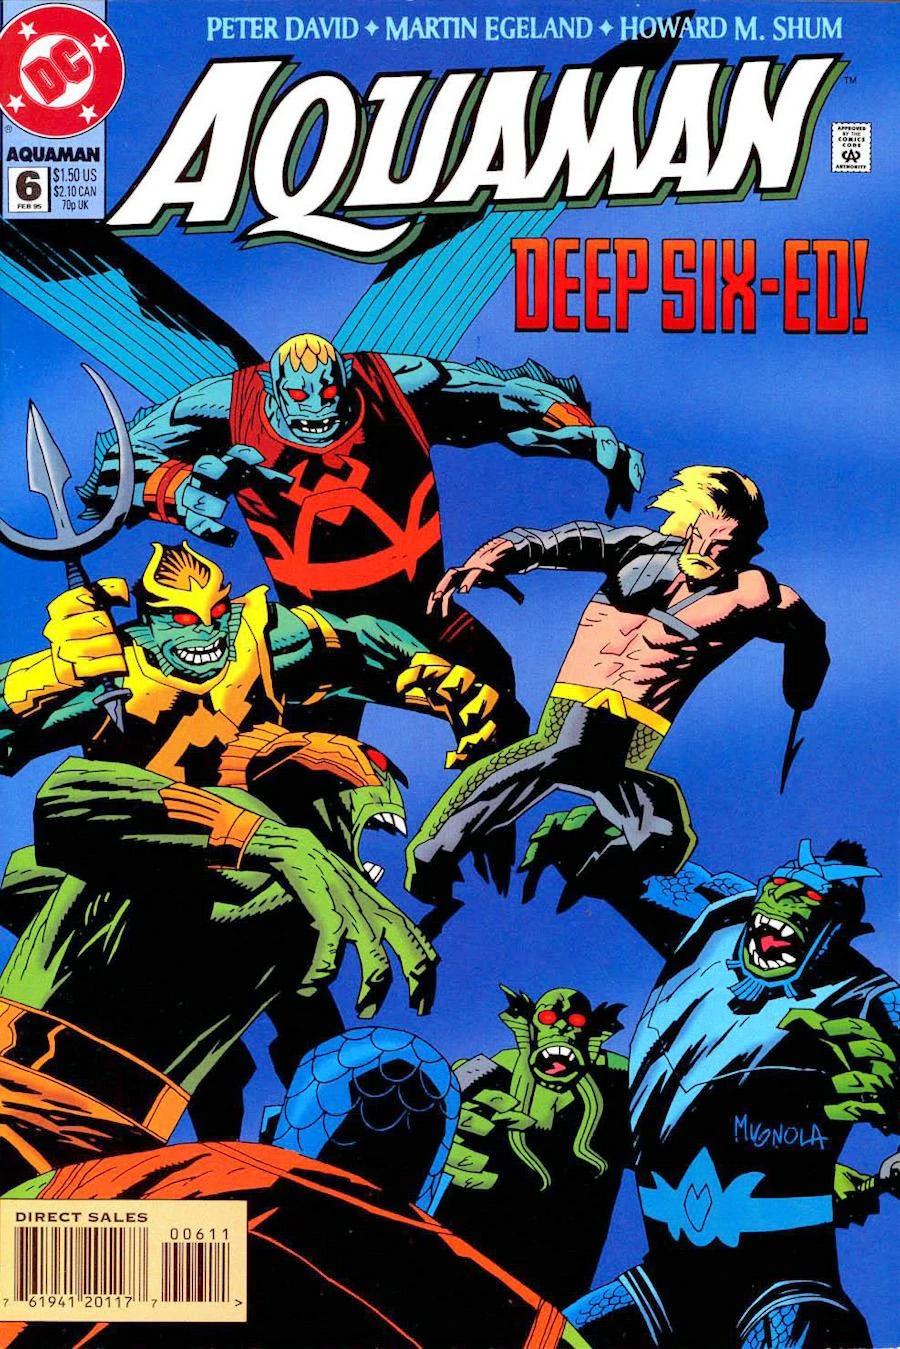 Aquaman #6, cover, art by Mike Mignola